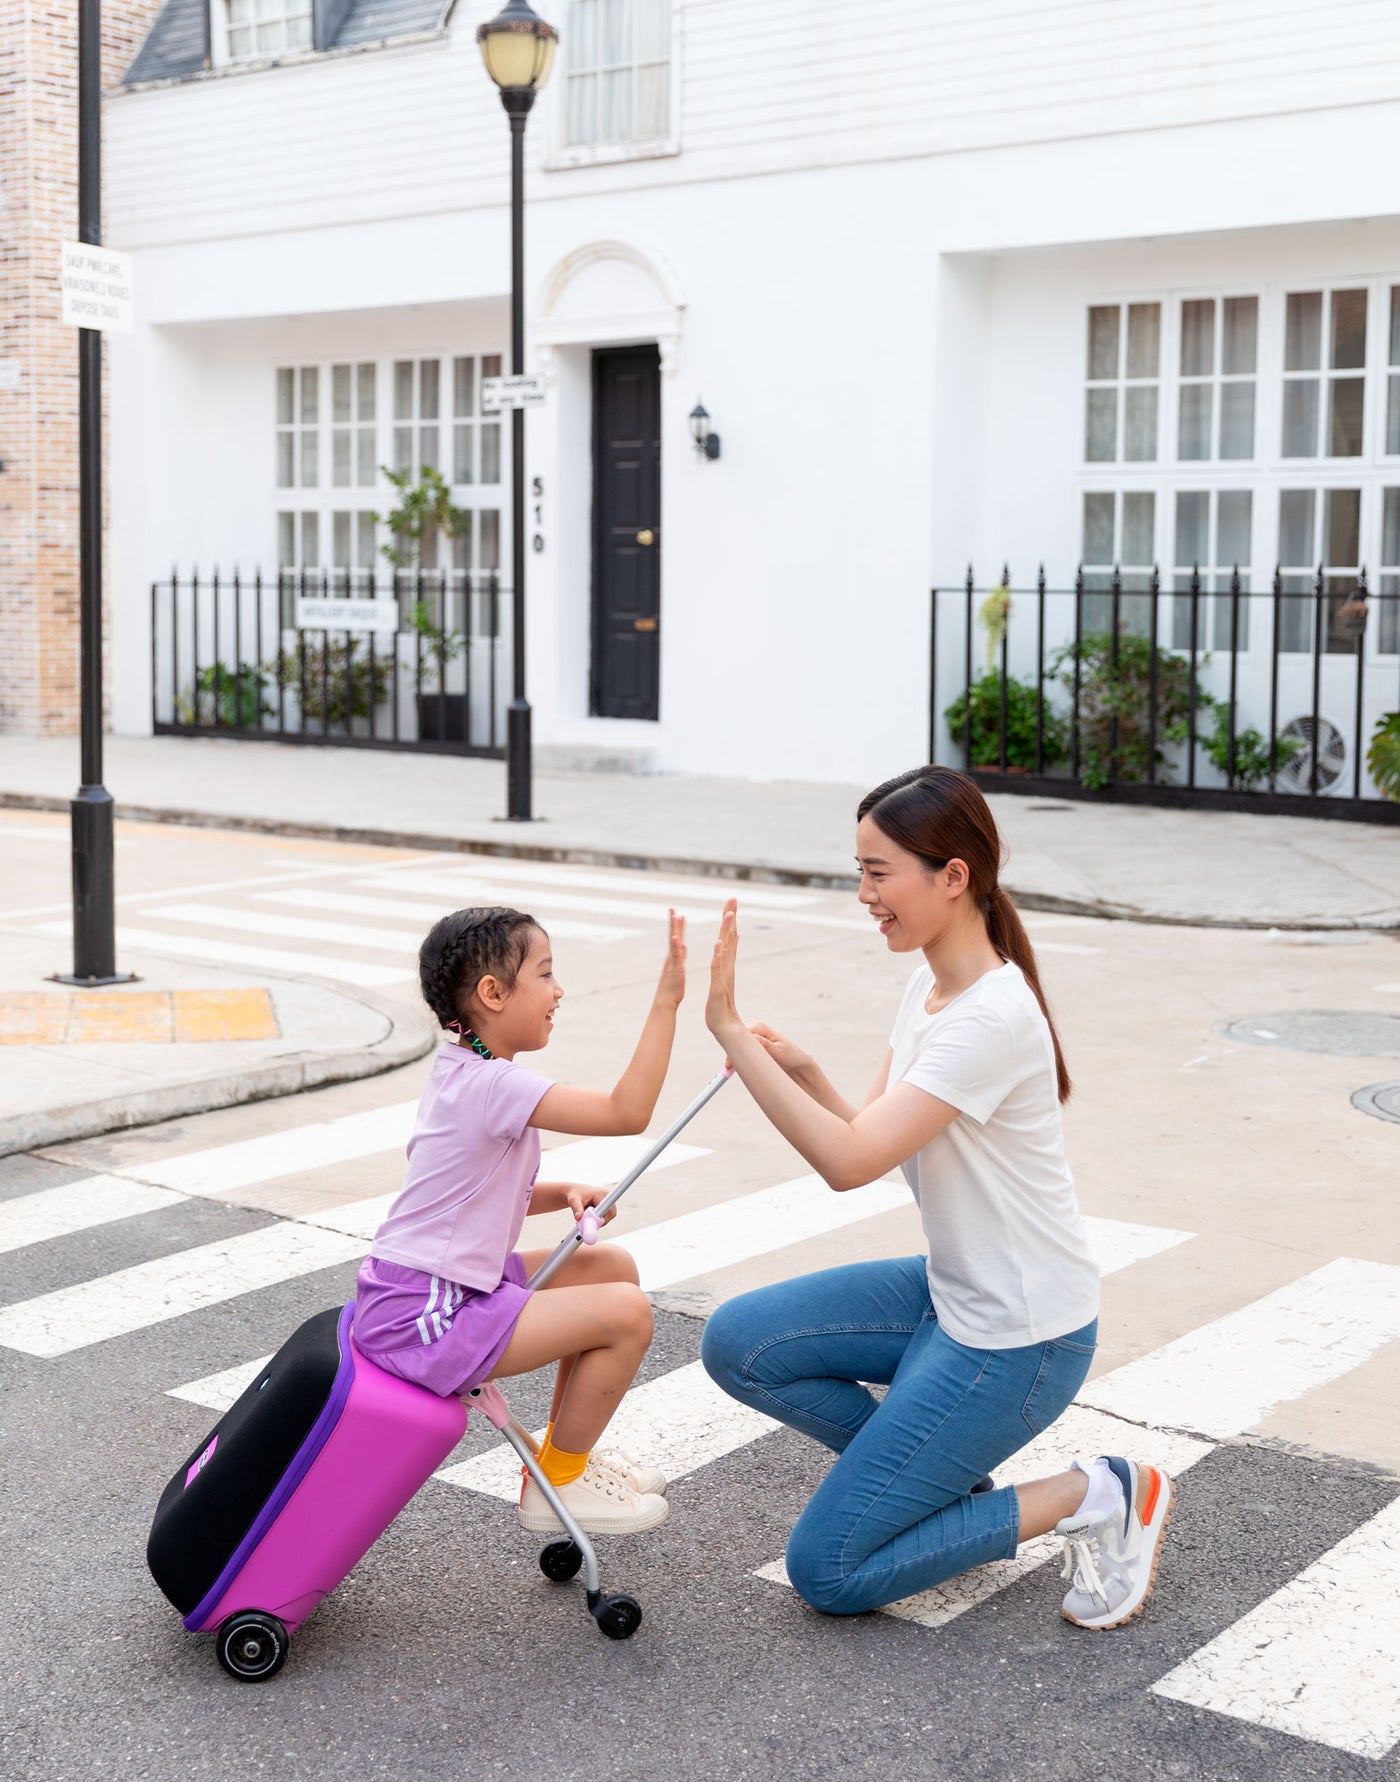 mum and daughter high fiving while riding the violet luggage suitcase